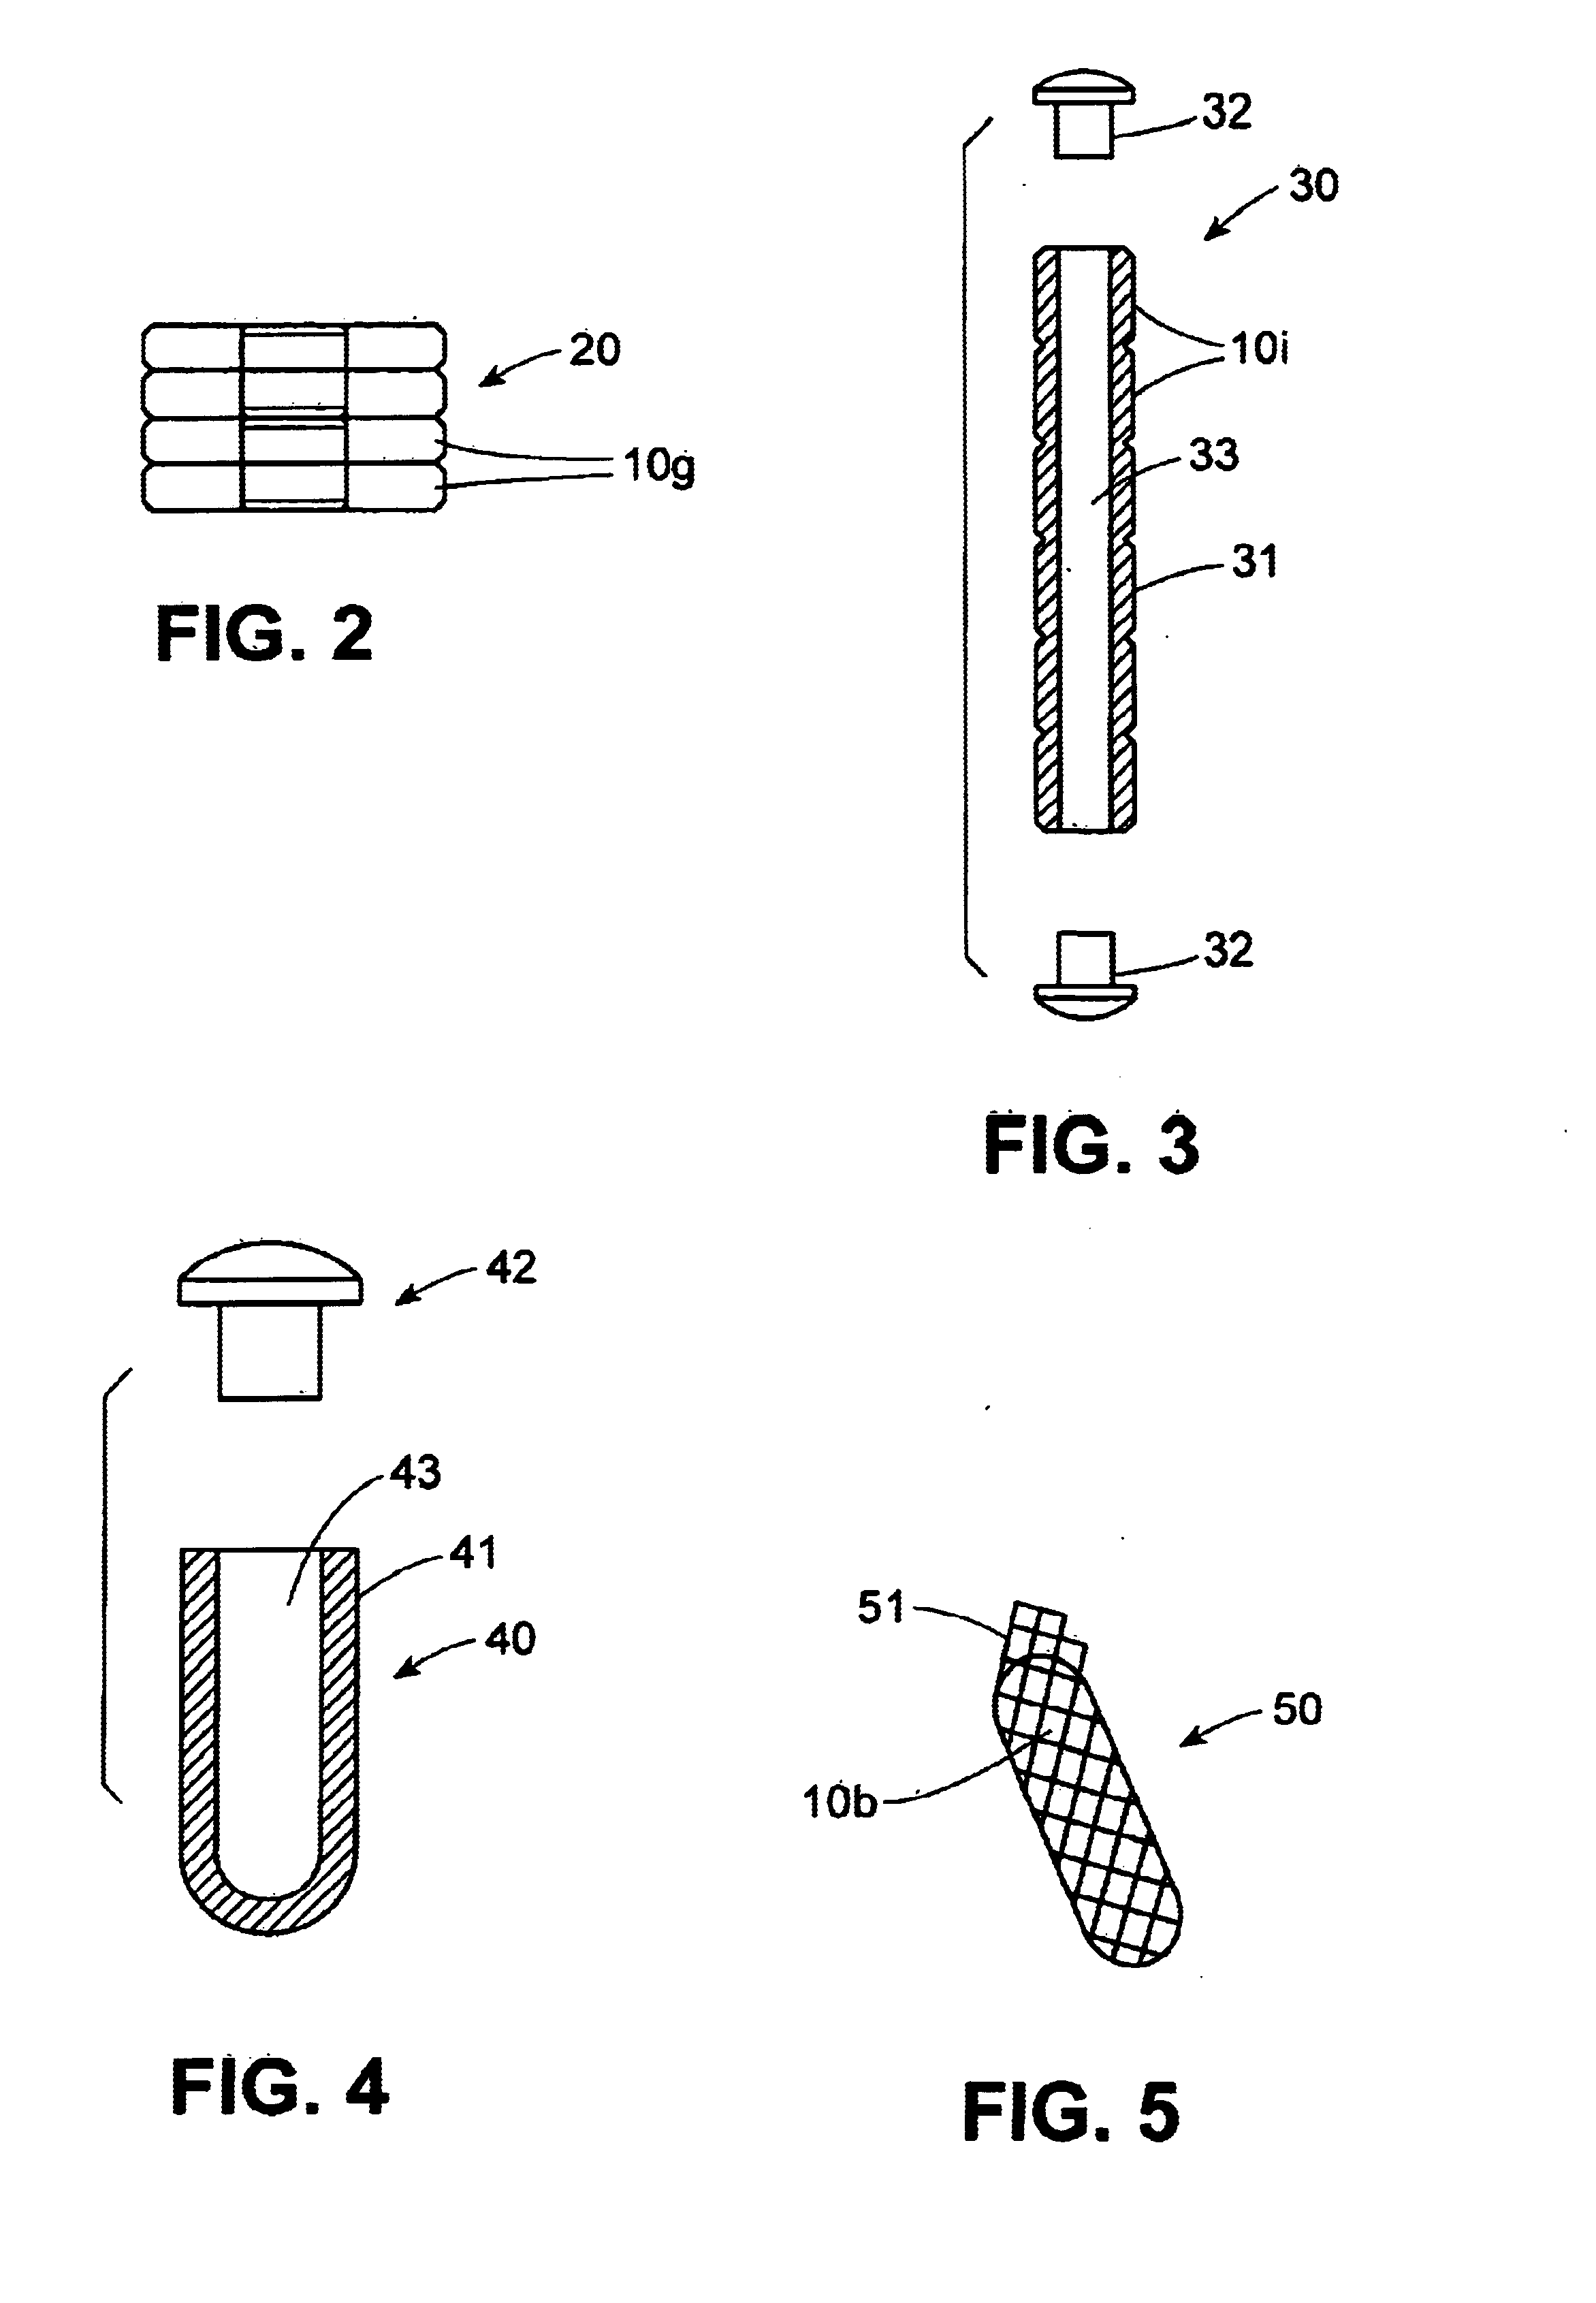 Bioabsorbable plugs containing drugs